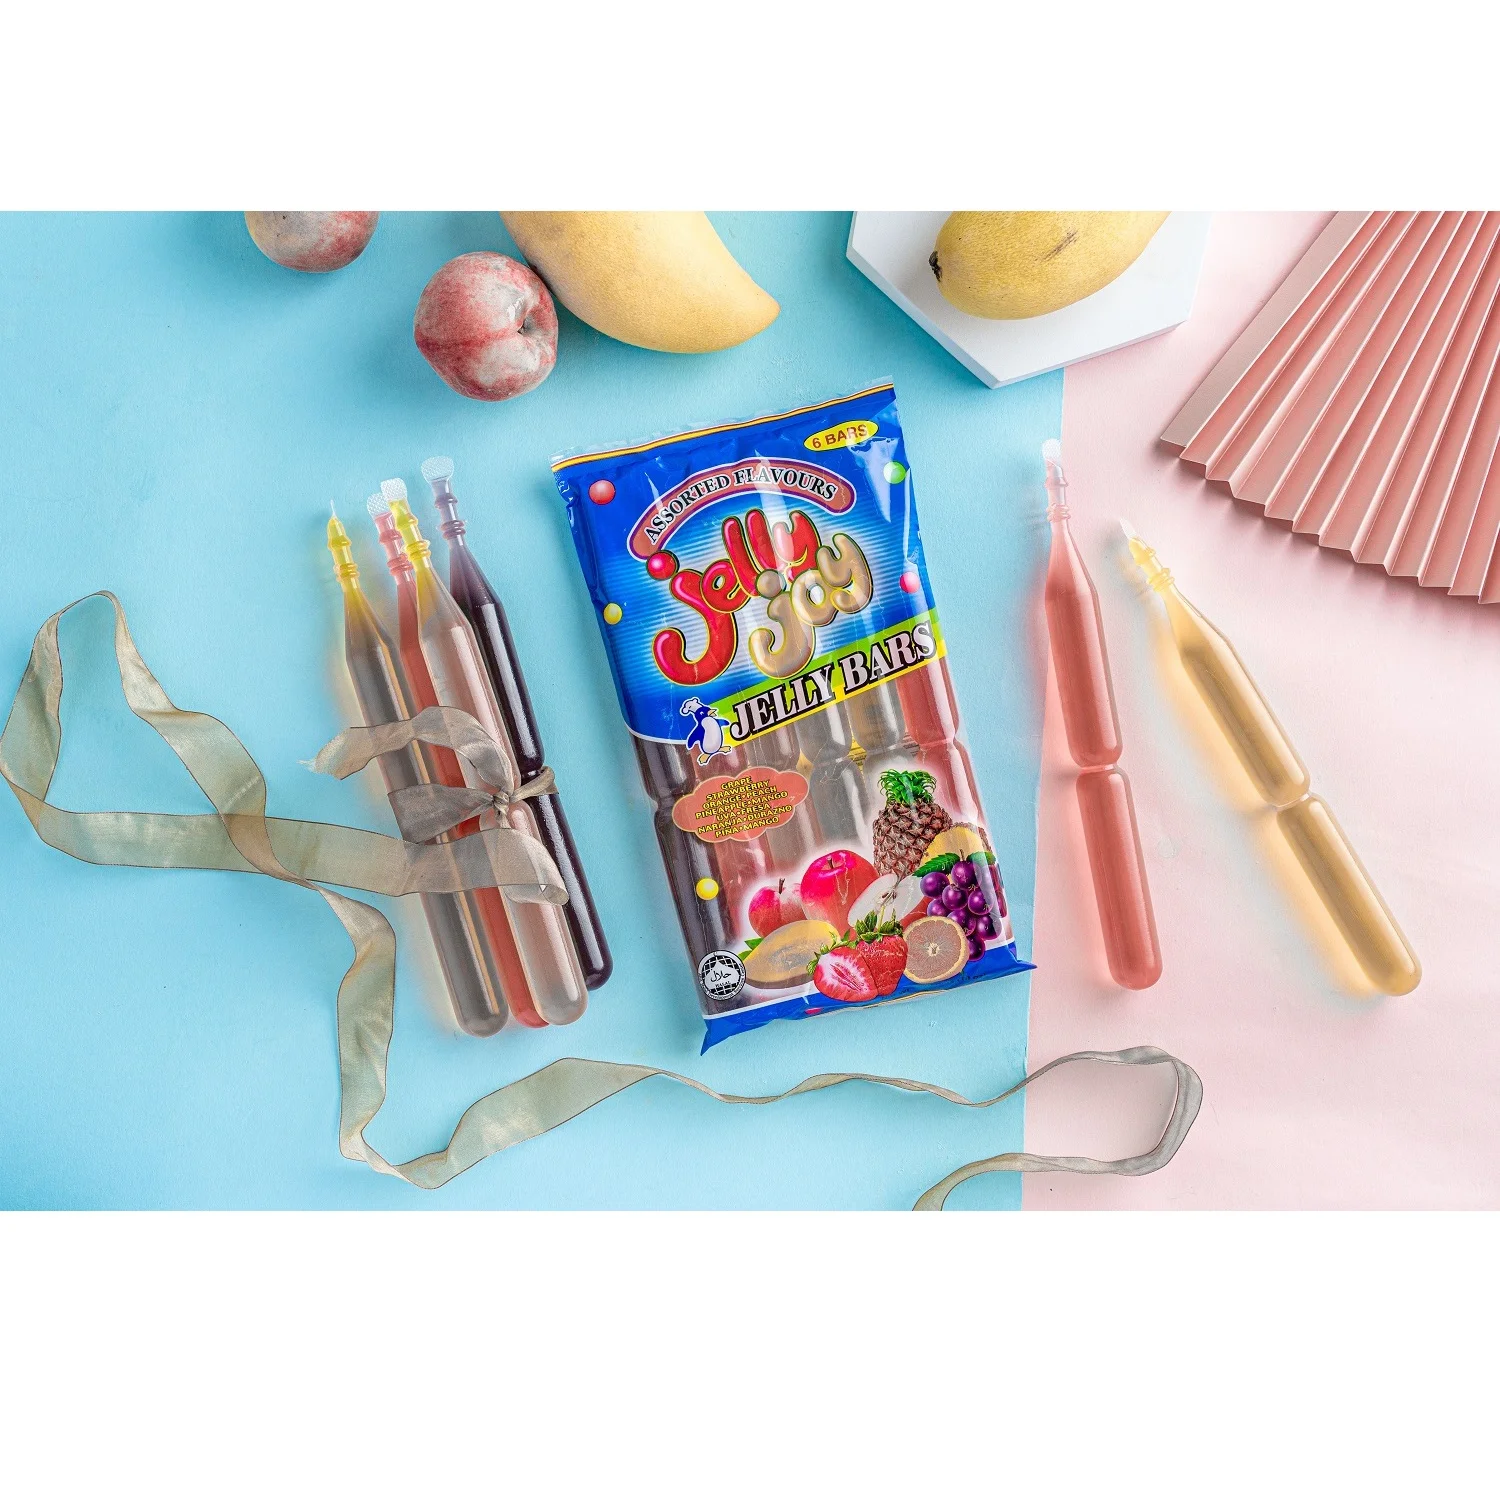 High Quality OEM Pouch Bulk Fruity Low-Carb Children Snack Dessert Drink Jelly Joy Jelly Bars 85gm x 6 Bars x 20 Bags